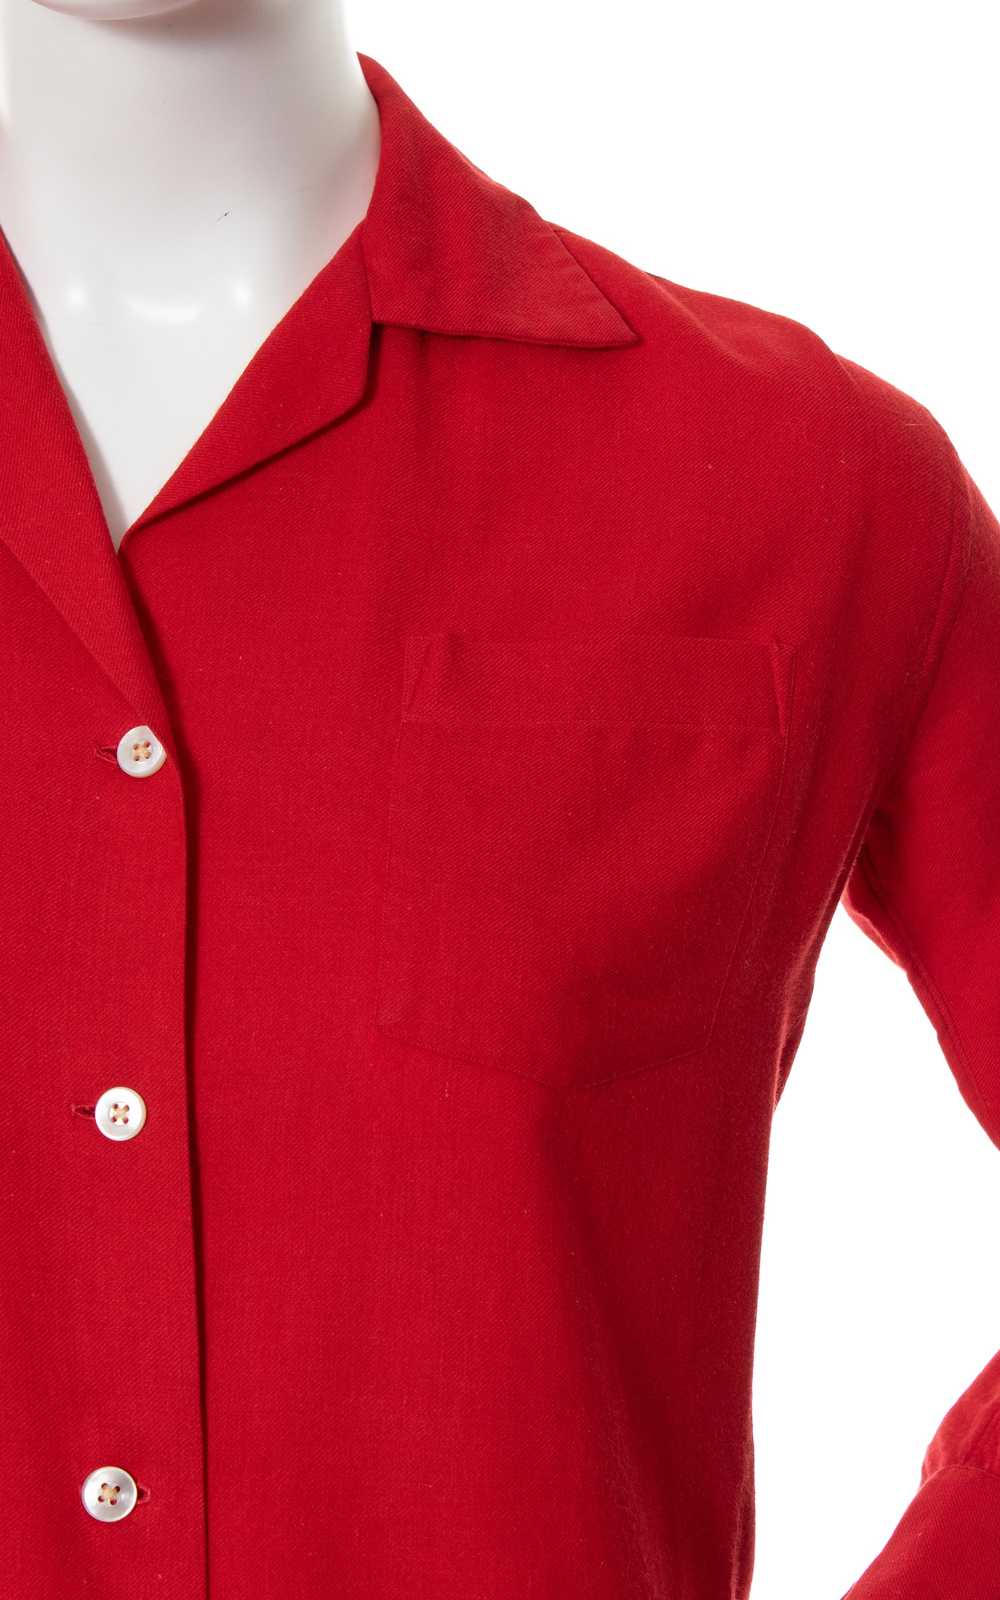 1950s Red Wool Blend Blouse | small/medium - image 6